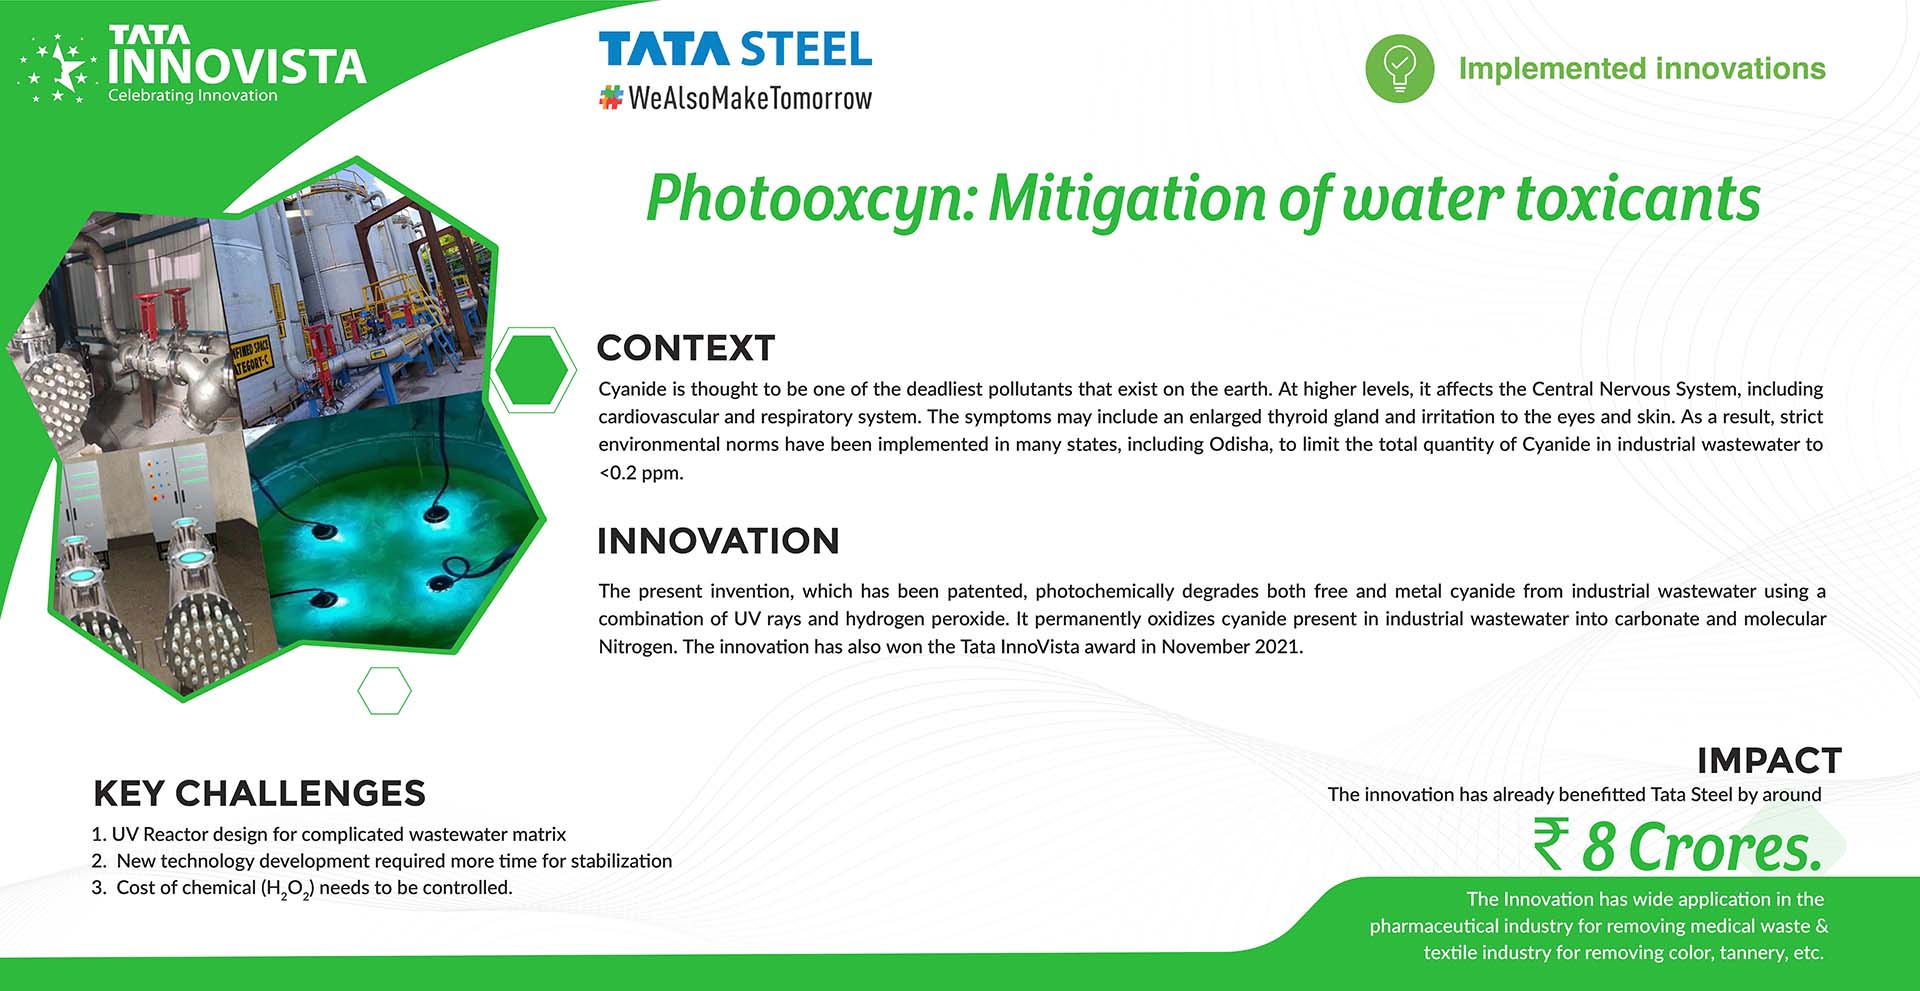 Photooxcyn: Mitigation of water toxicants